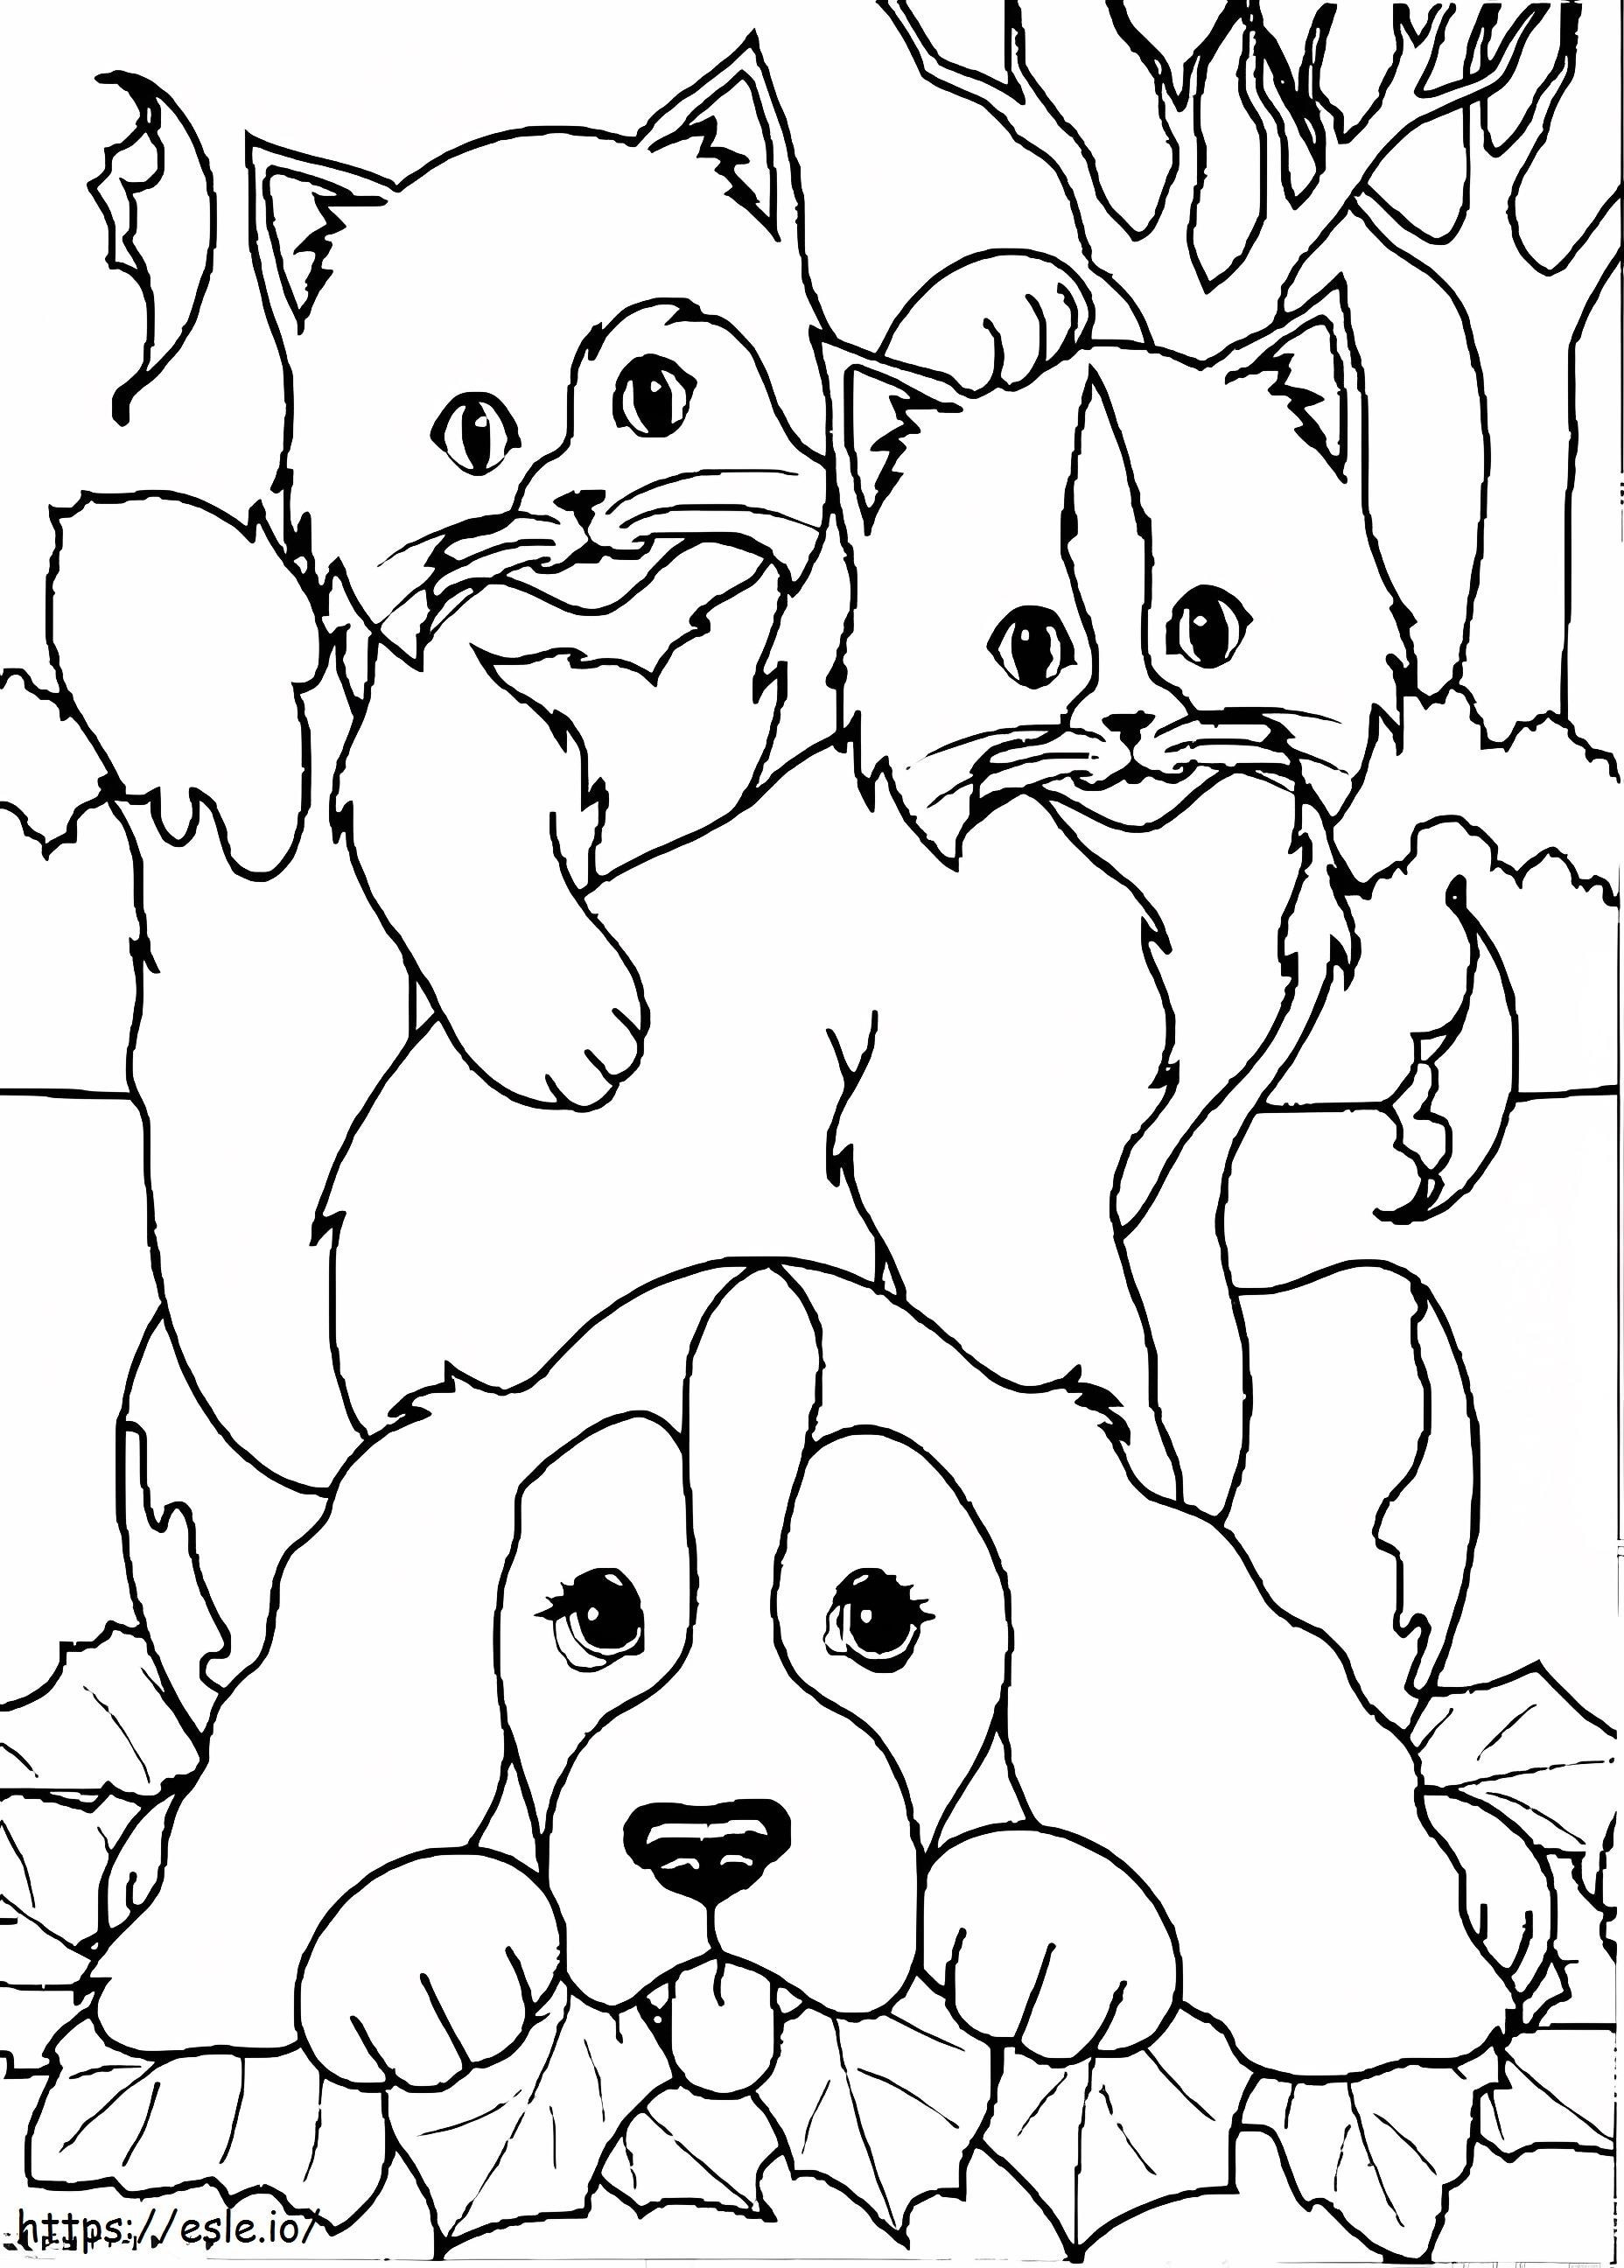 Dog And Cats coloring page